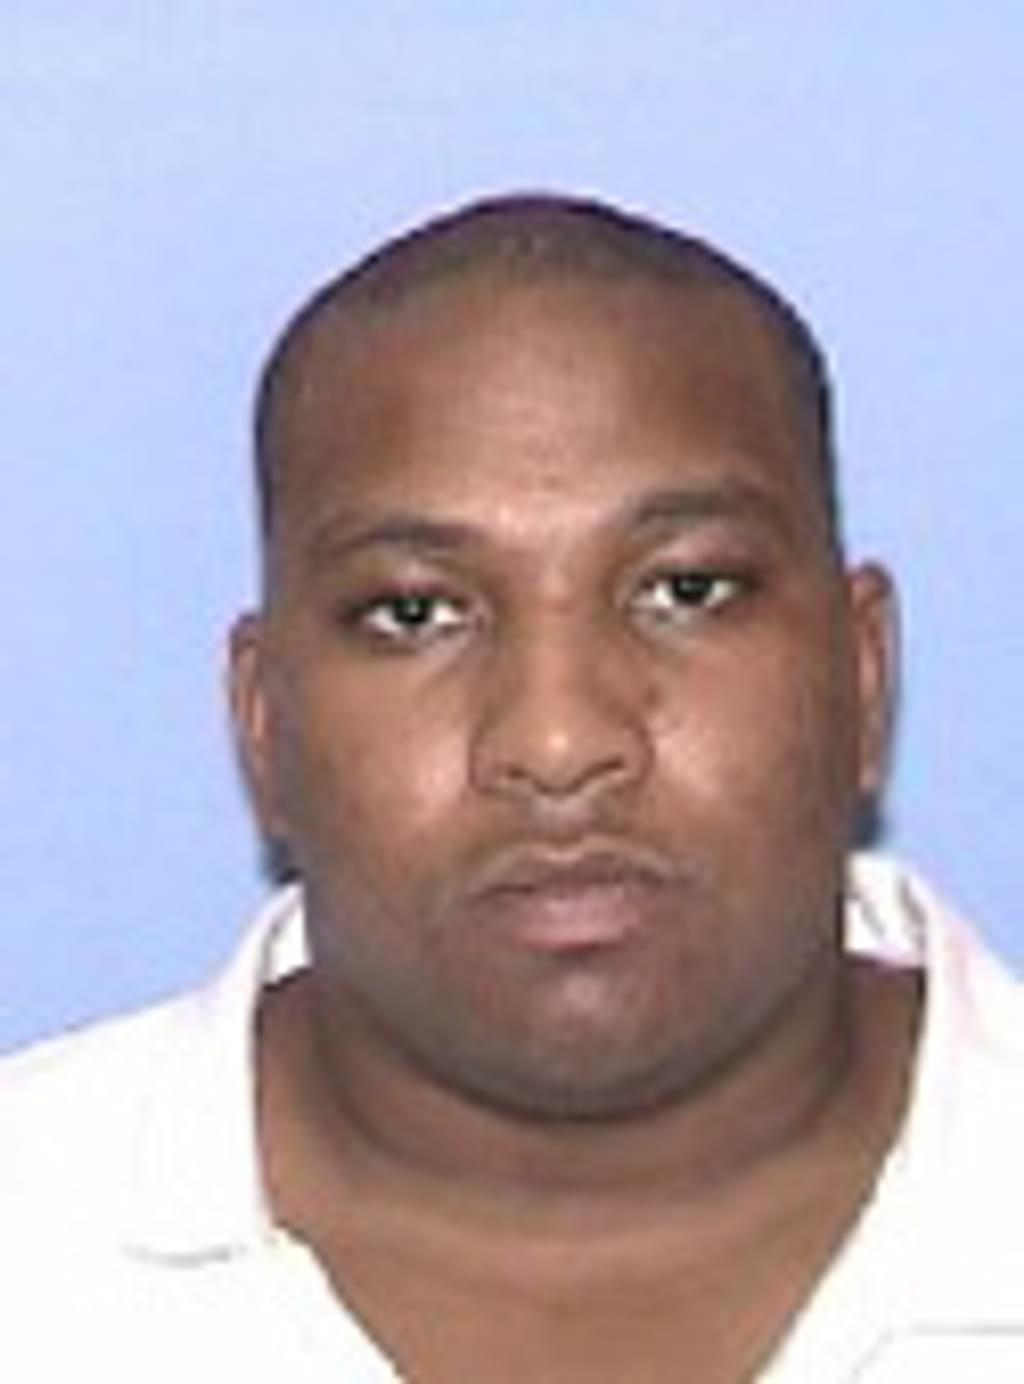 Texas Court Finds Marcus Druery Mentally Incompetent, Spares Him From Execution